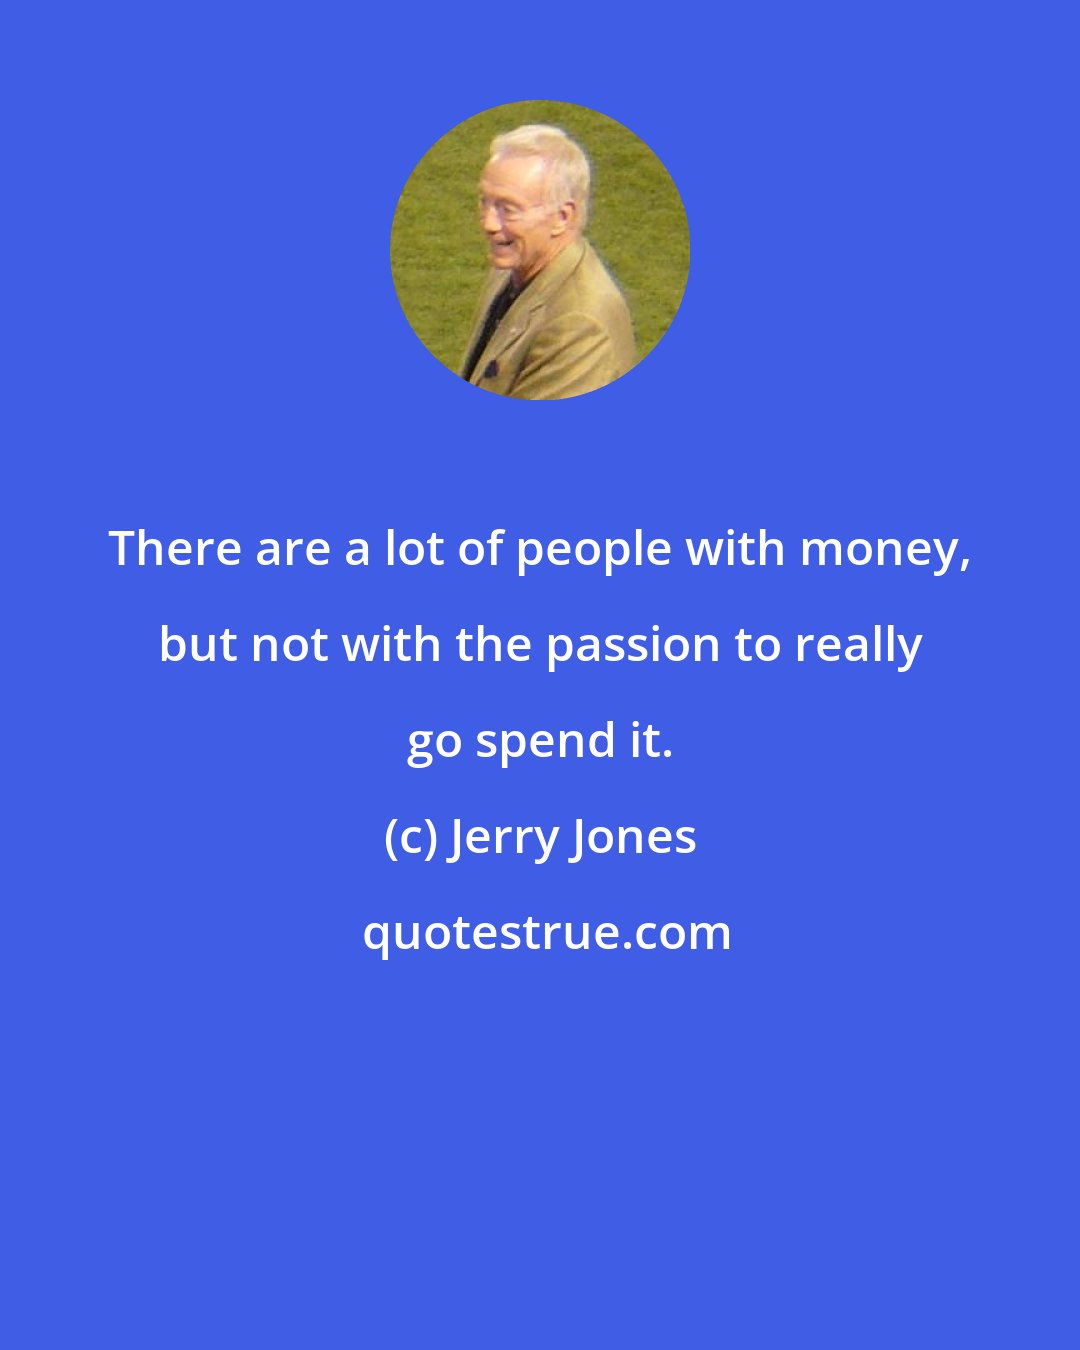 Jerry Jones: There are a lot of people with money, but not with the passion to really go spend it.